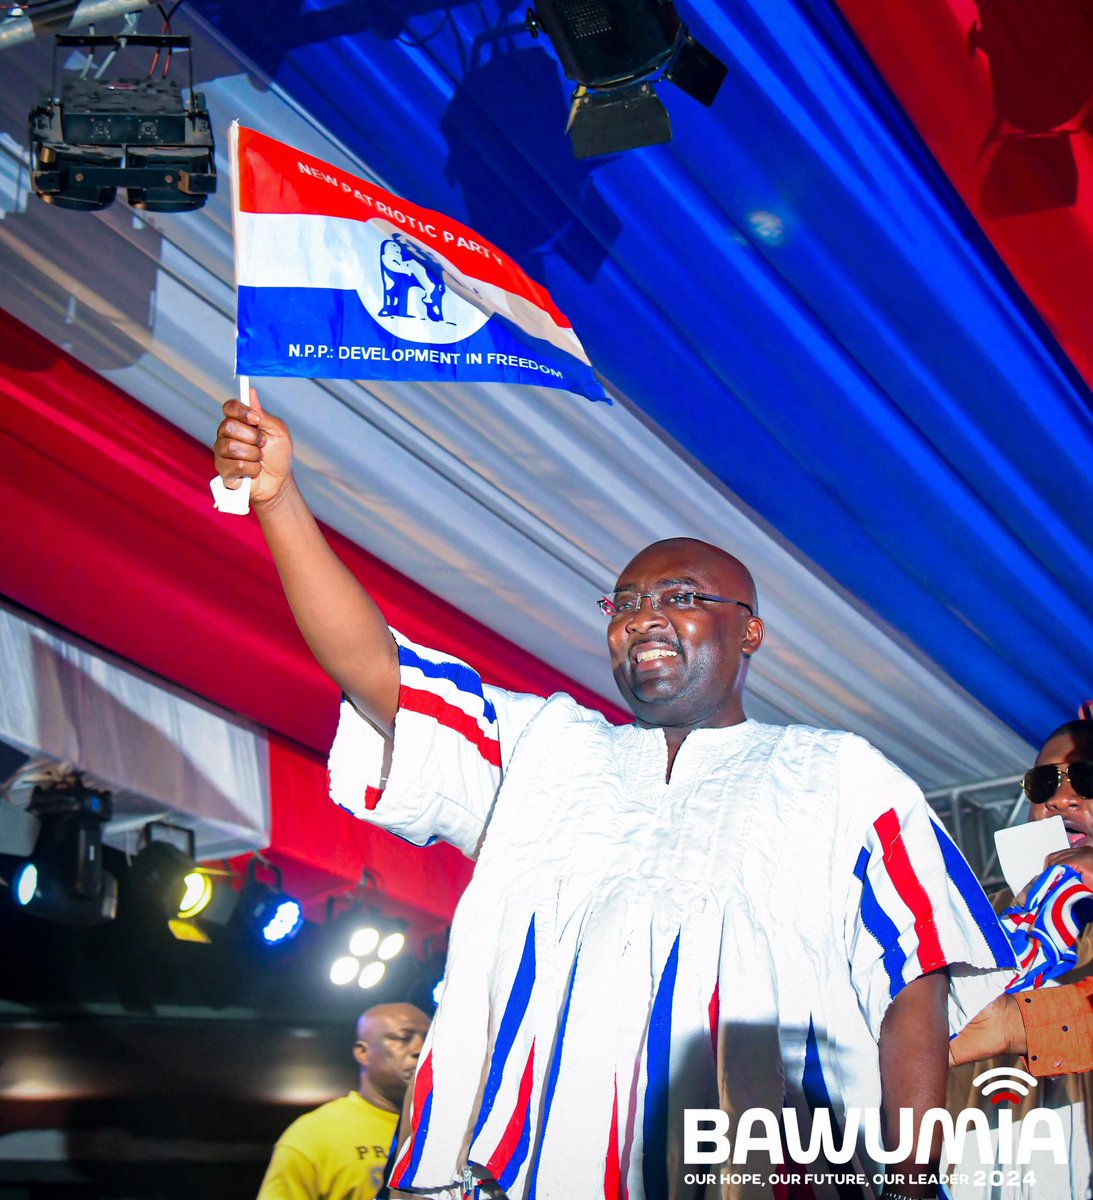 Vote Bawumia for President on December 7th because he will abolish the e-levy and implement bold solutions to quicken the pace of Ghana's development. From Akufo-Addo to Bawumia, it's possible. 
#newwsfile #Bawumia2024 #Bawumia #Ghana #tv3newday #JoyNews